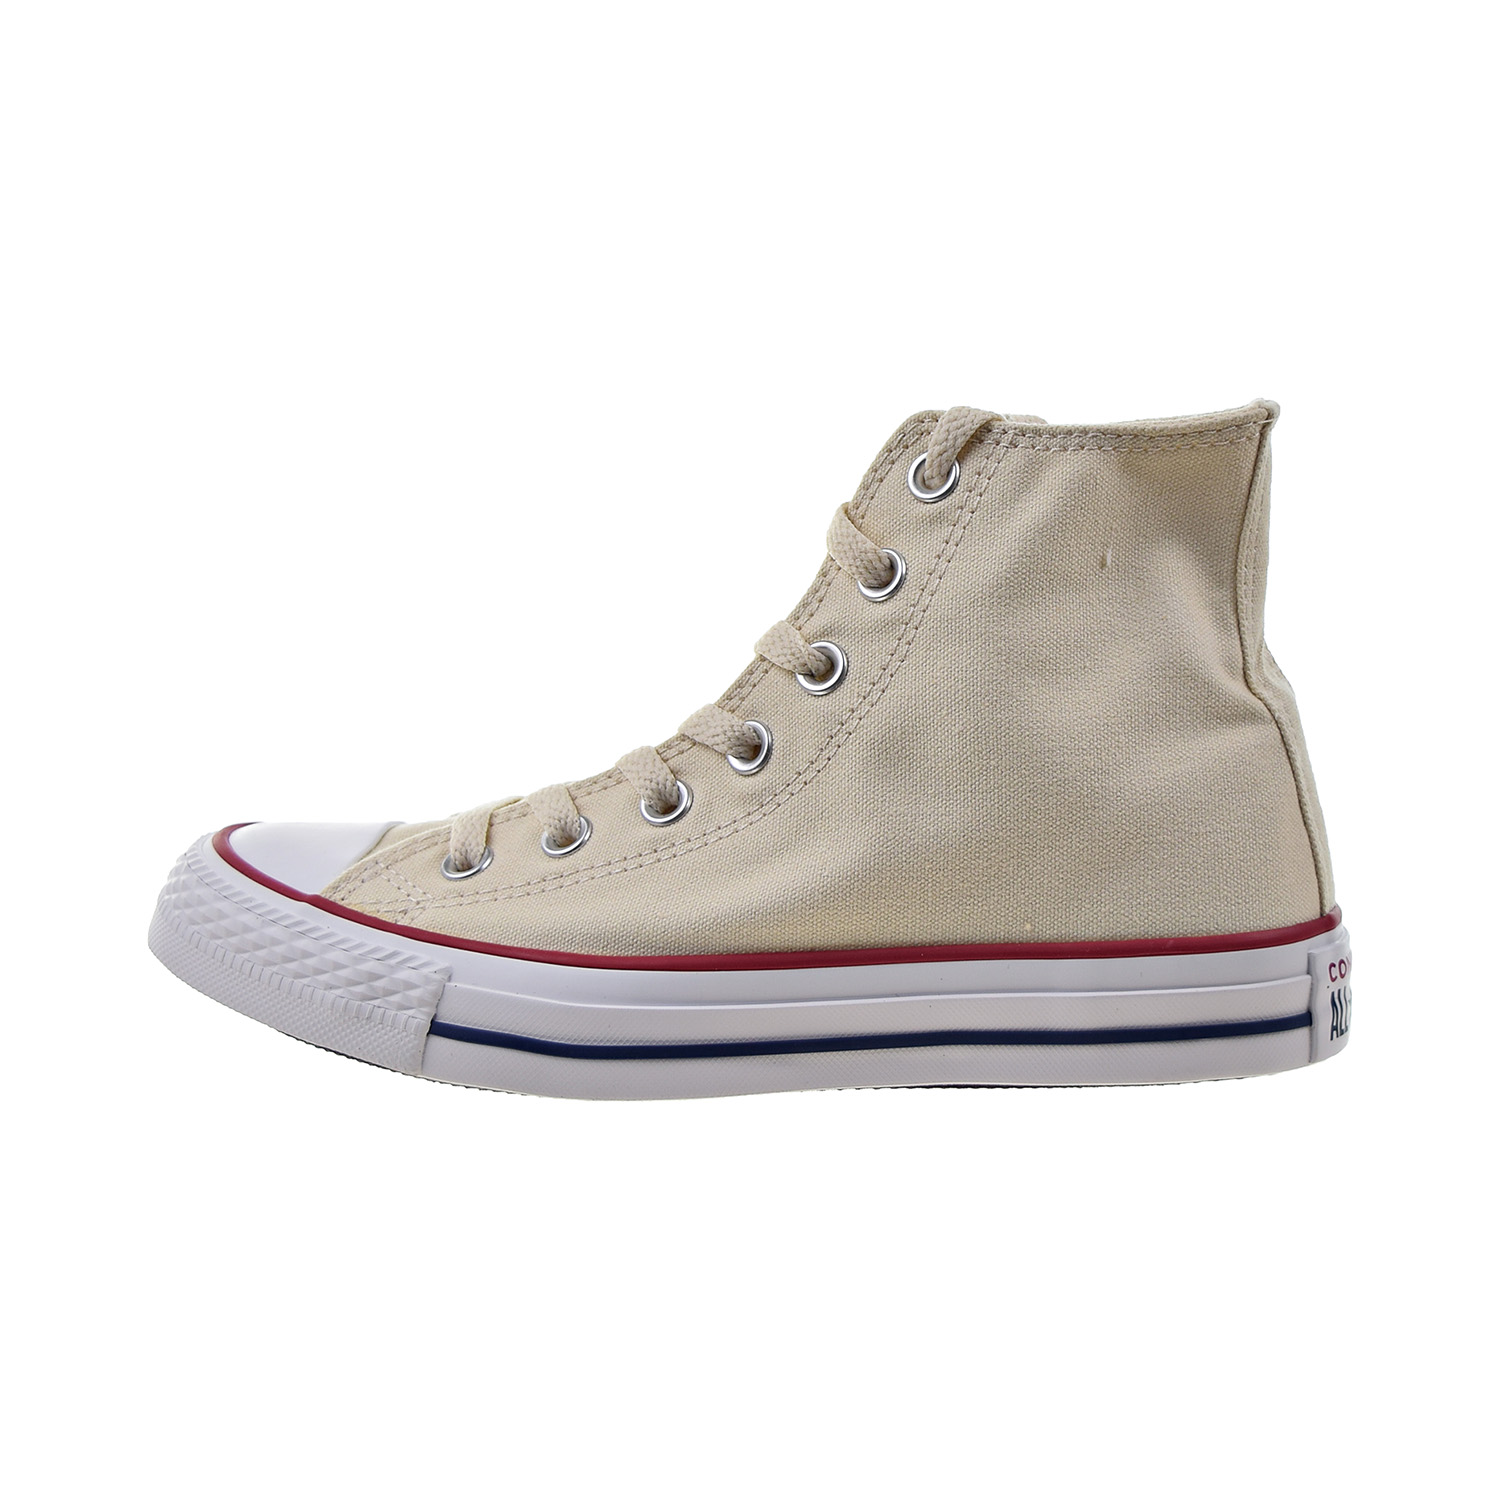 Converse Chuck Taylor All Star High Top Sneaker - image 4 of 6